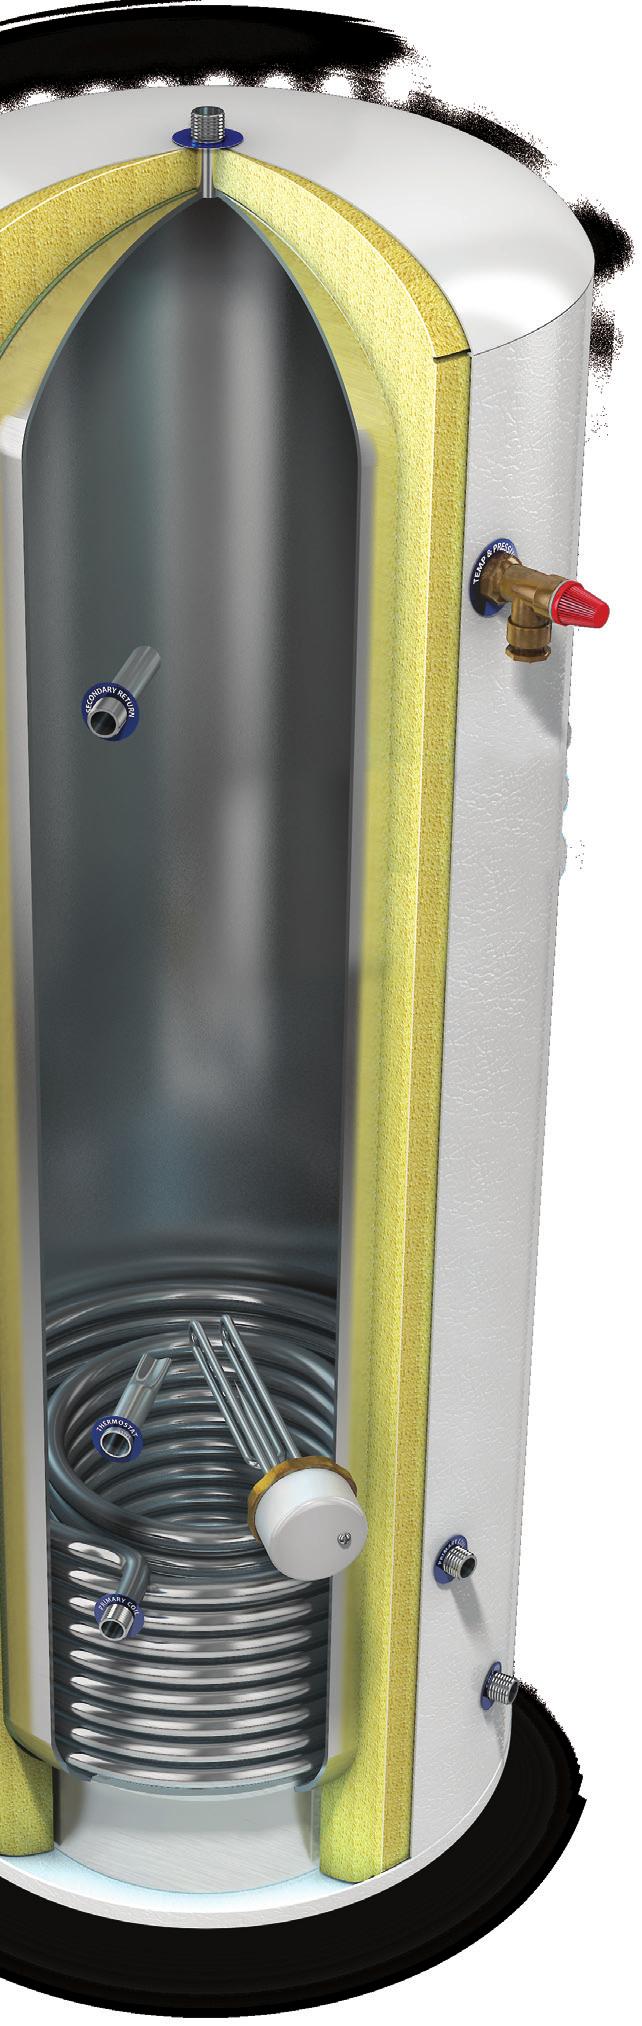 Made In Stainless... MEET OUR RANGE OF UNVENTED PRODUCTS cylinders are manufactured using Duplex Stainless Steel where other companies may use lesser grades of Steel.